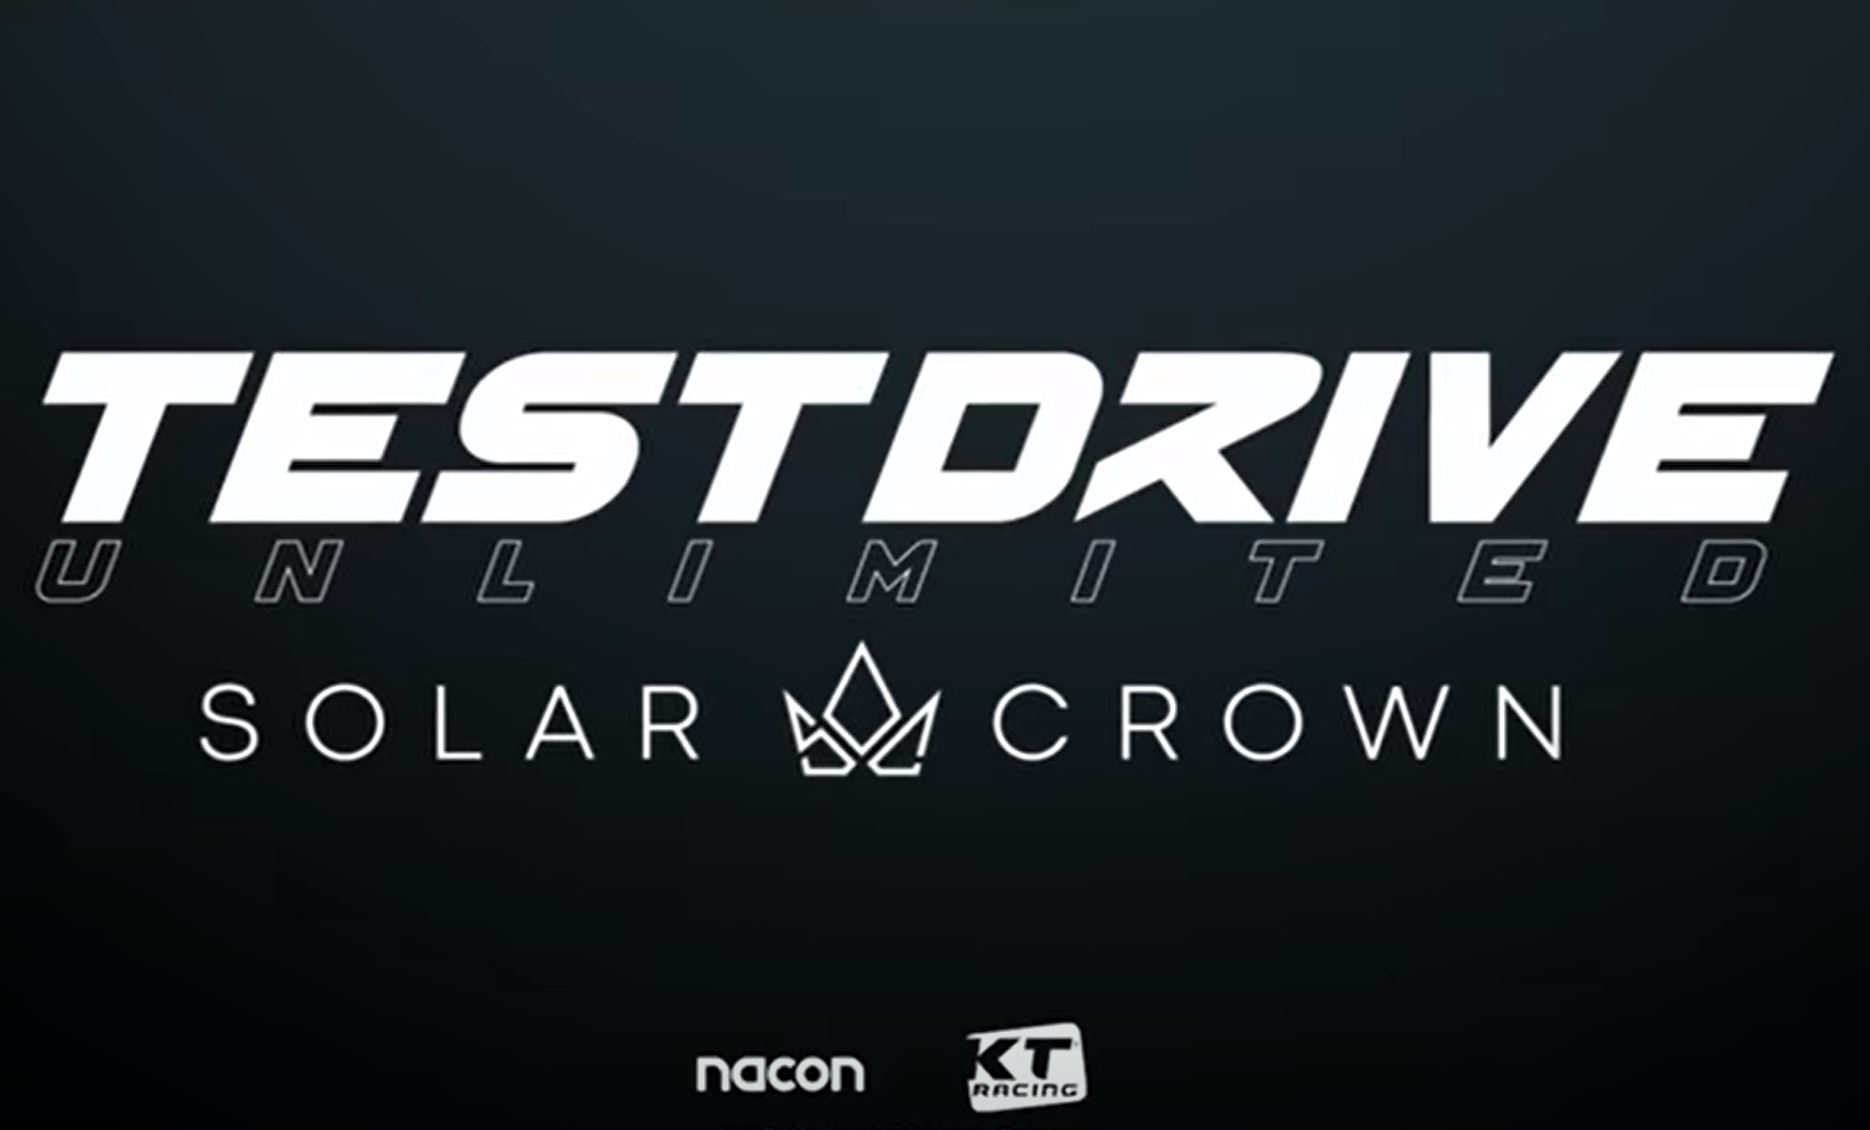 Test Drive Unlimited Solar Crown Hong Kong Location Revealed